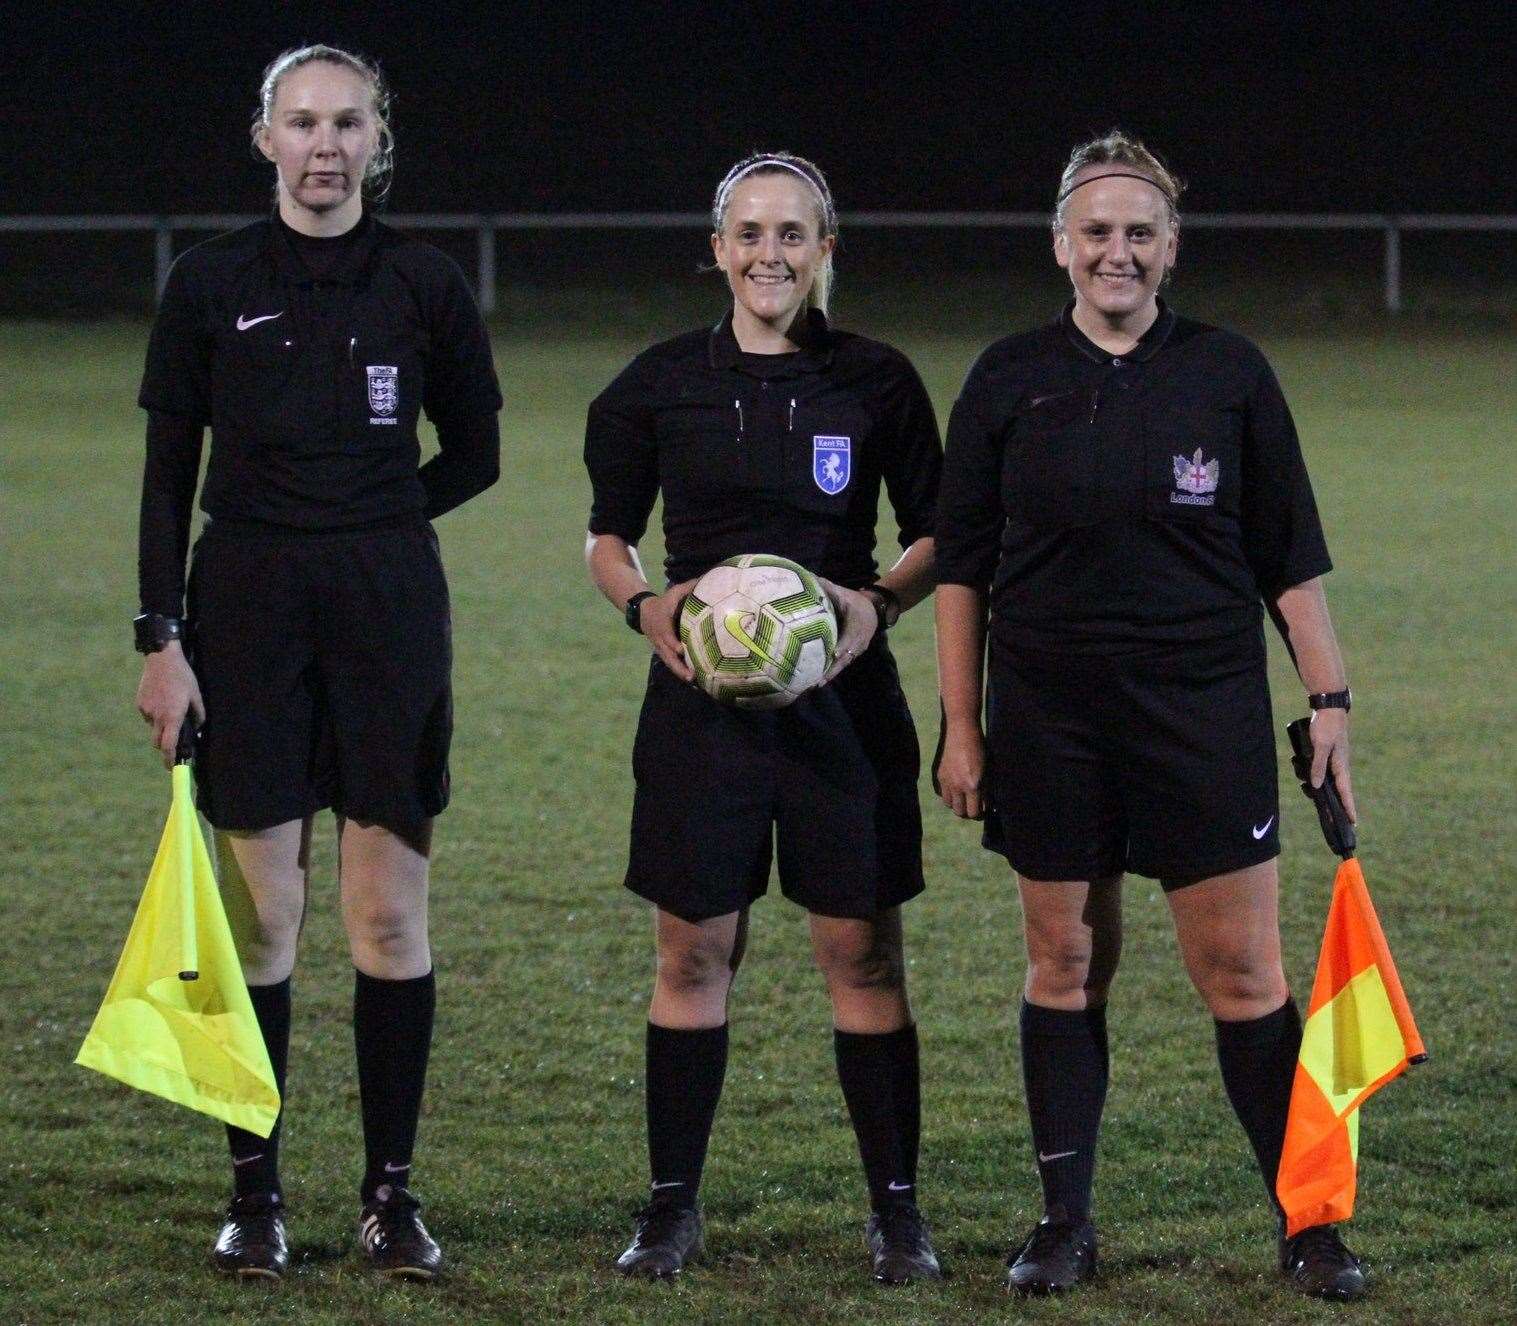 Referee Beth Archer with assistants Alison Wade and Esther Perry - the first all-female officiating team in the Southern Counties East League